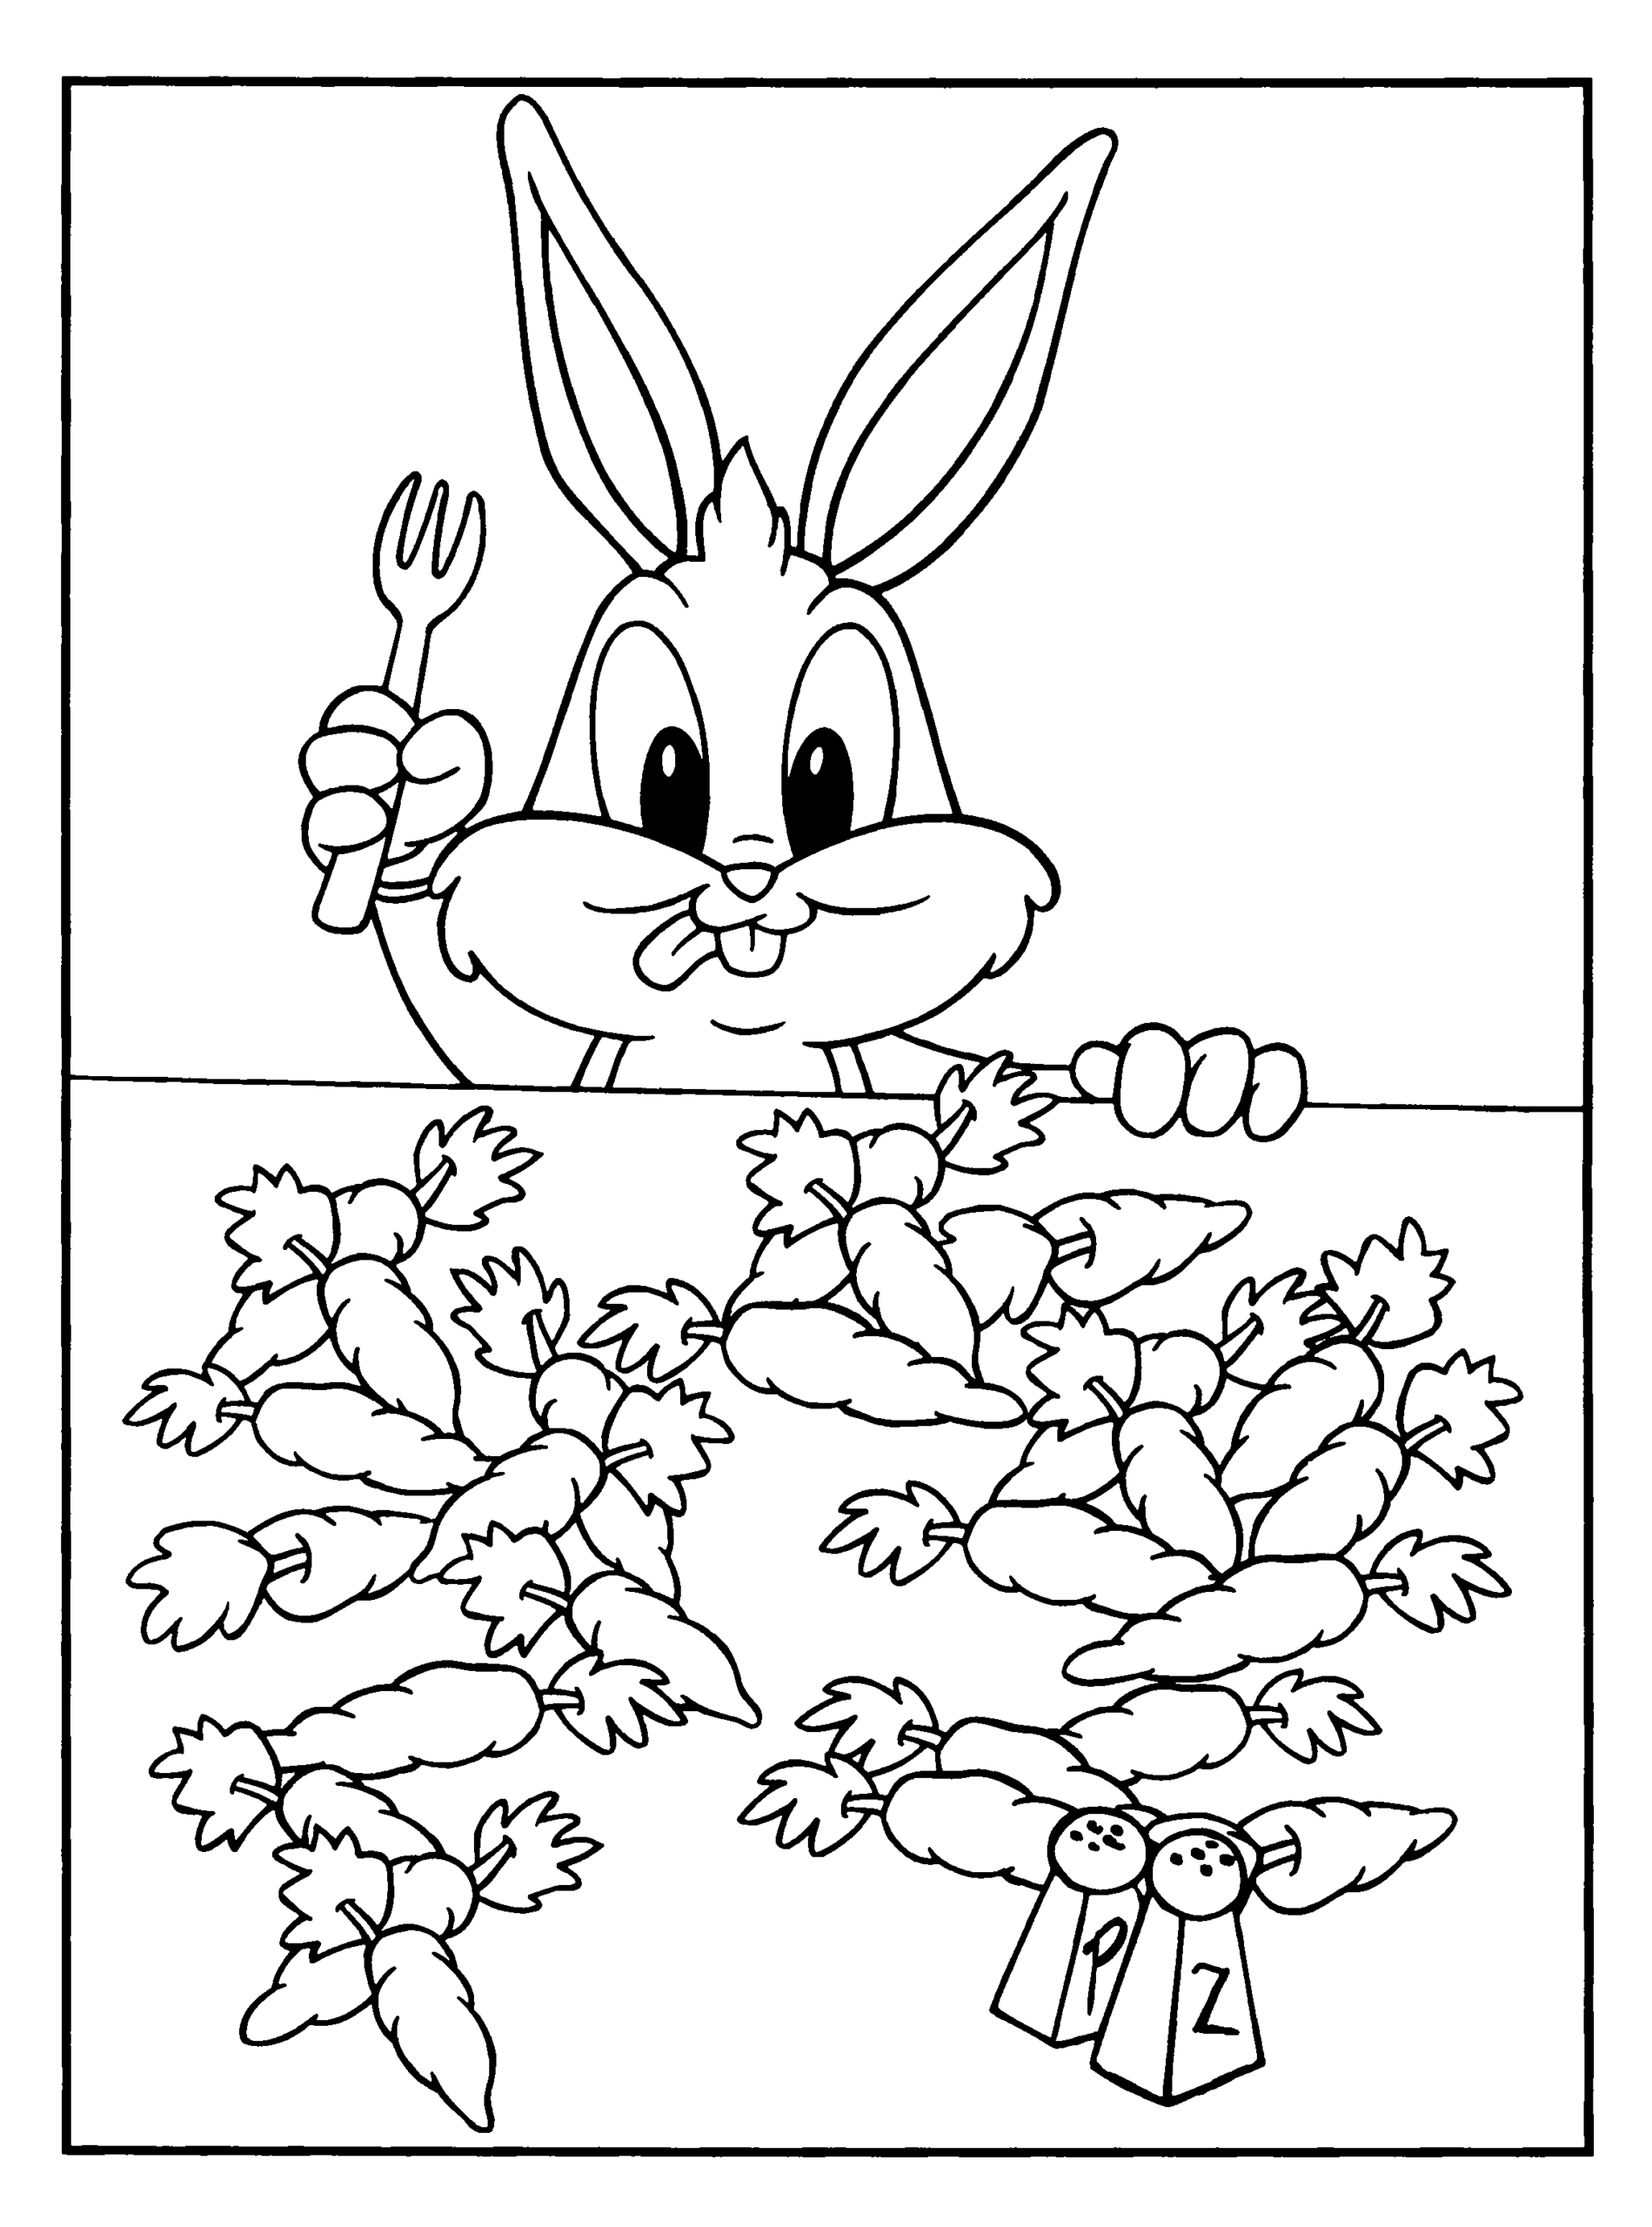 Looney Tunes Coloring Pages TV Film looney tunes 1 Printable 2020 04575 Coloring4free